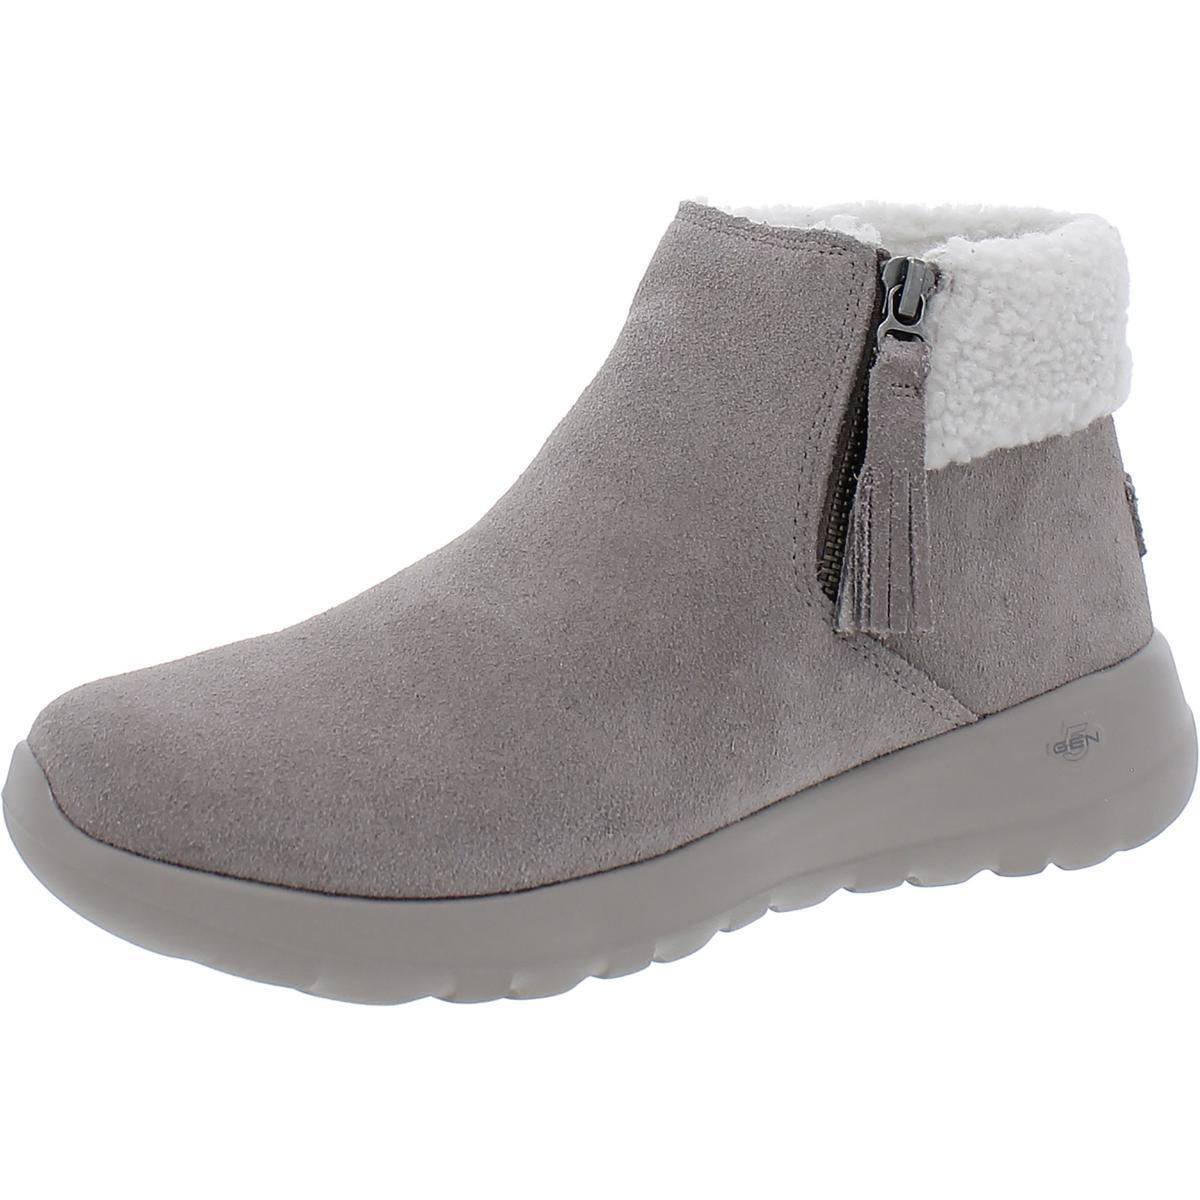 Skechers Womens Happily Cozy Winter Snow Boots Shoes Bhfo 3377 Dark Taupe